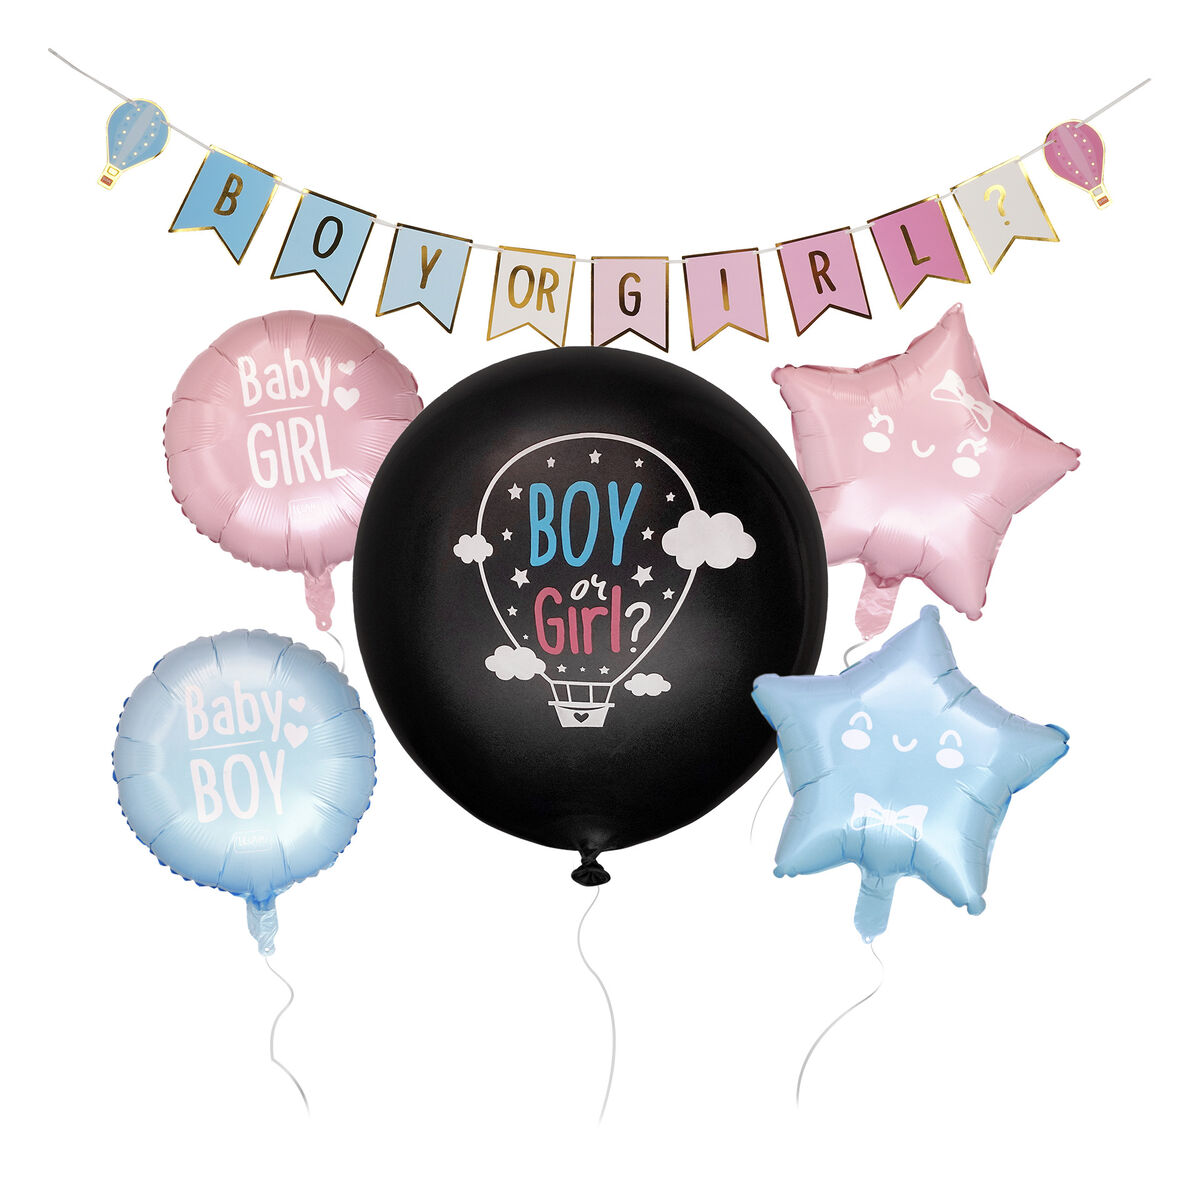 Gender Reveal Party Kit, , zoo